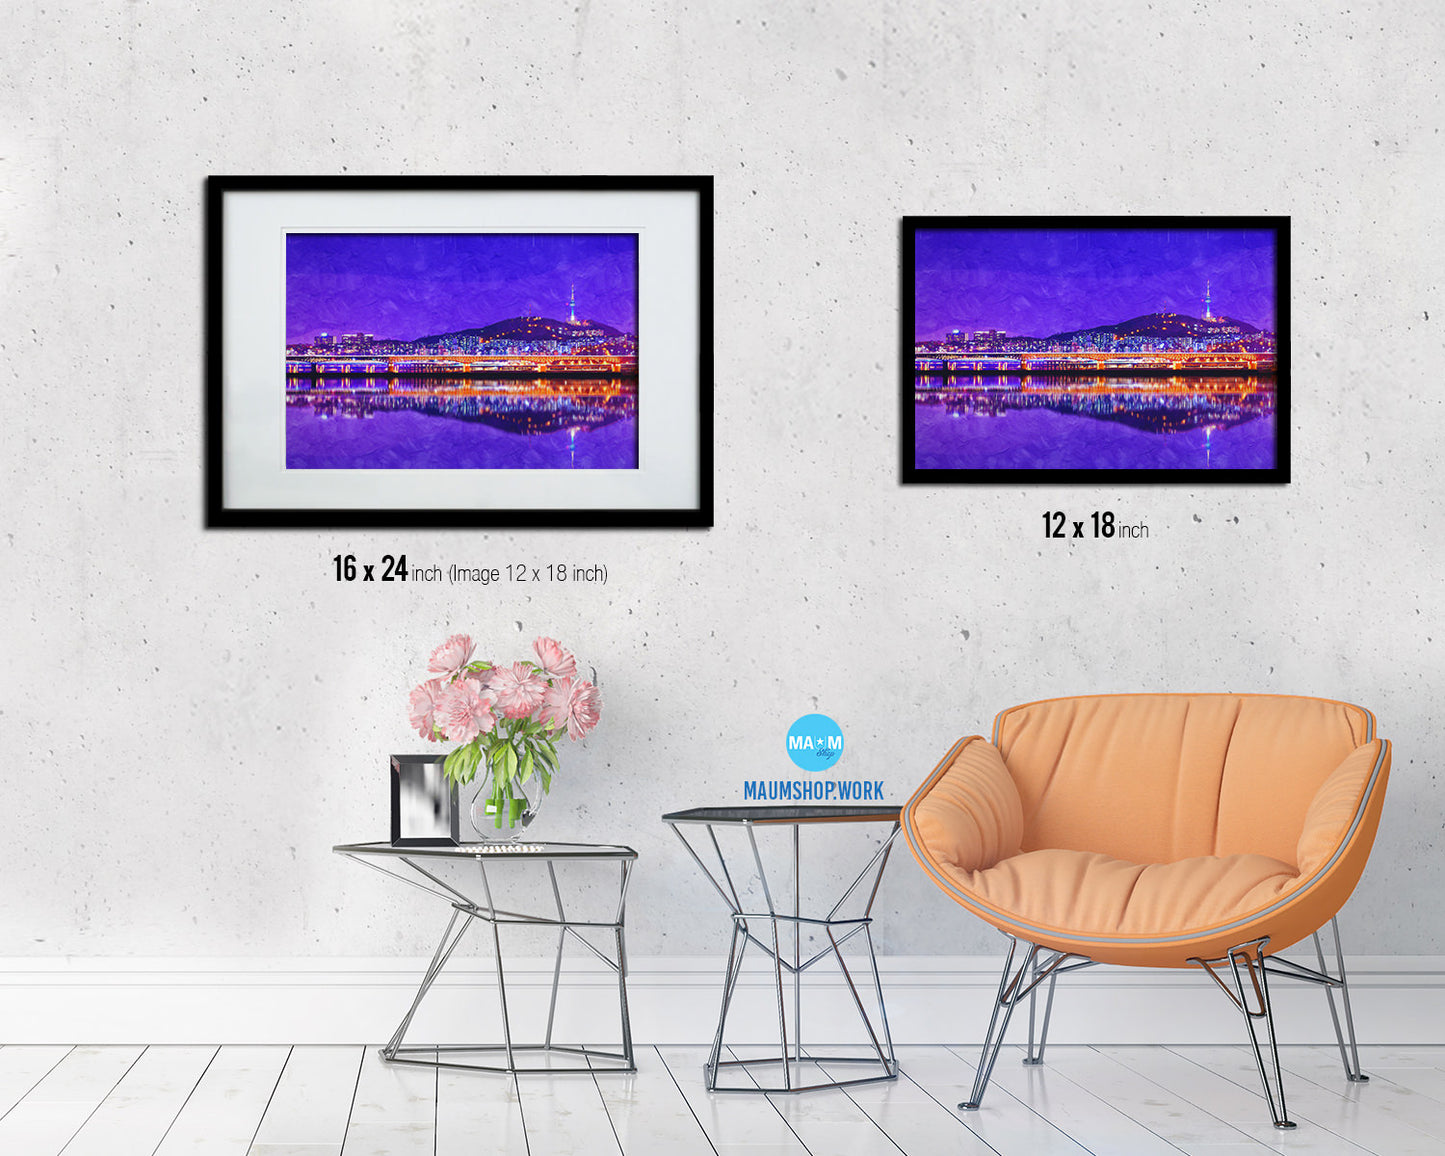 Namsan Mountain and Seoul Tower Landscape Painting Print Art Frame Home Wall Decor Gifts